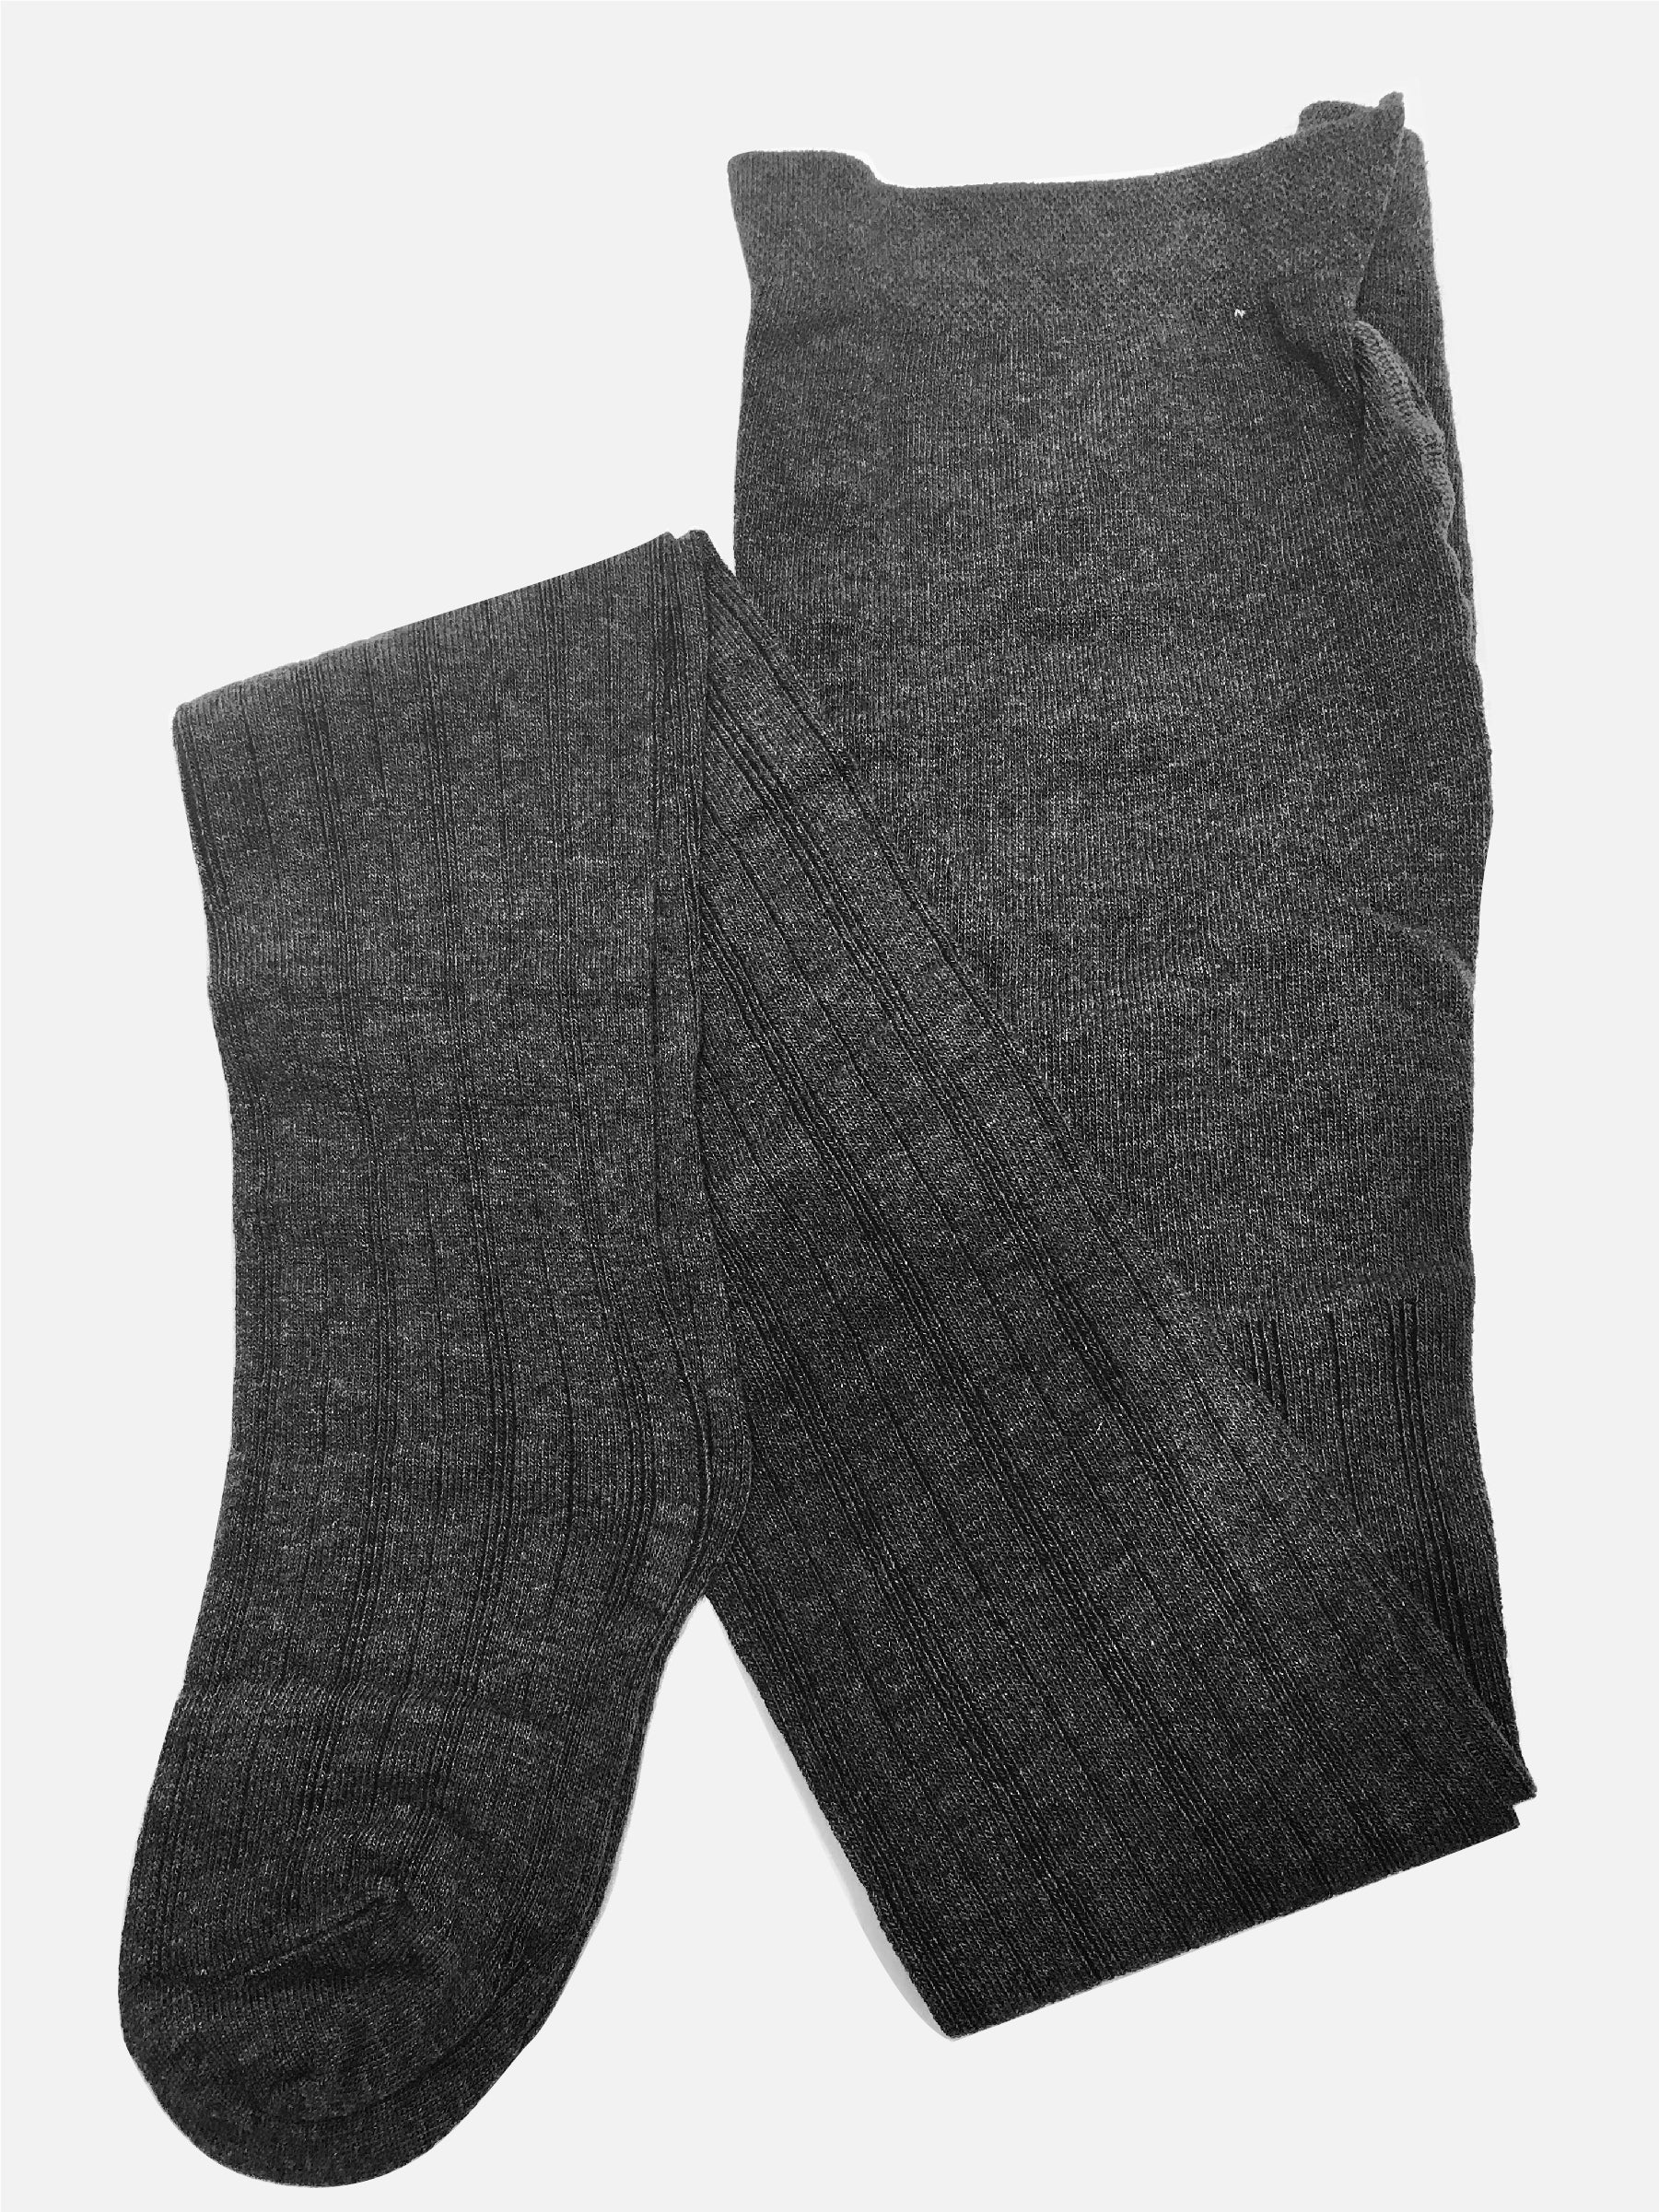 Os̩ Siberia Collant - dark grey wool and cotton knitted warm thermal knitted tights